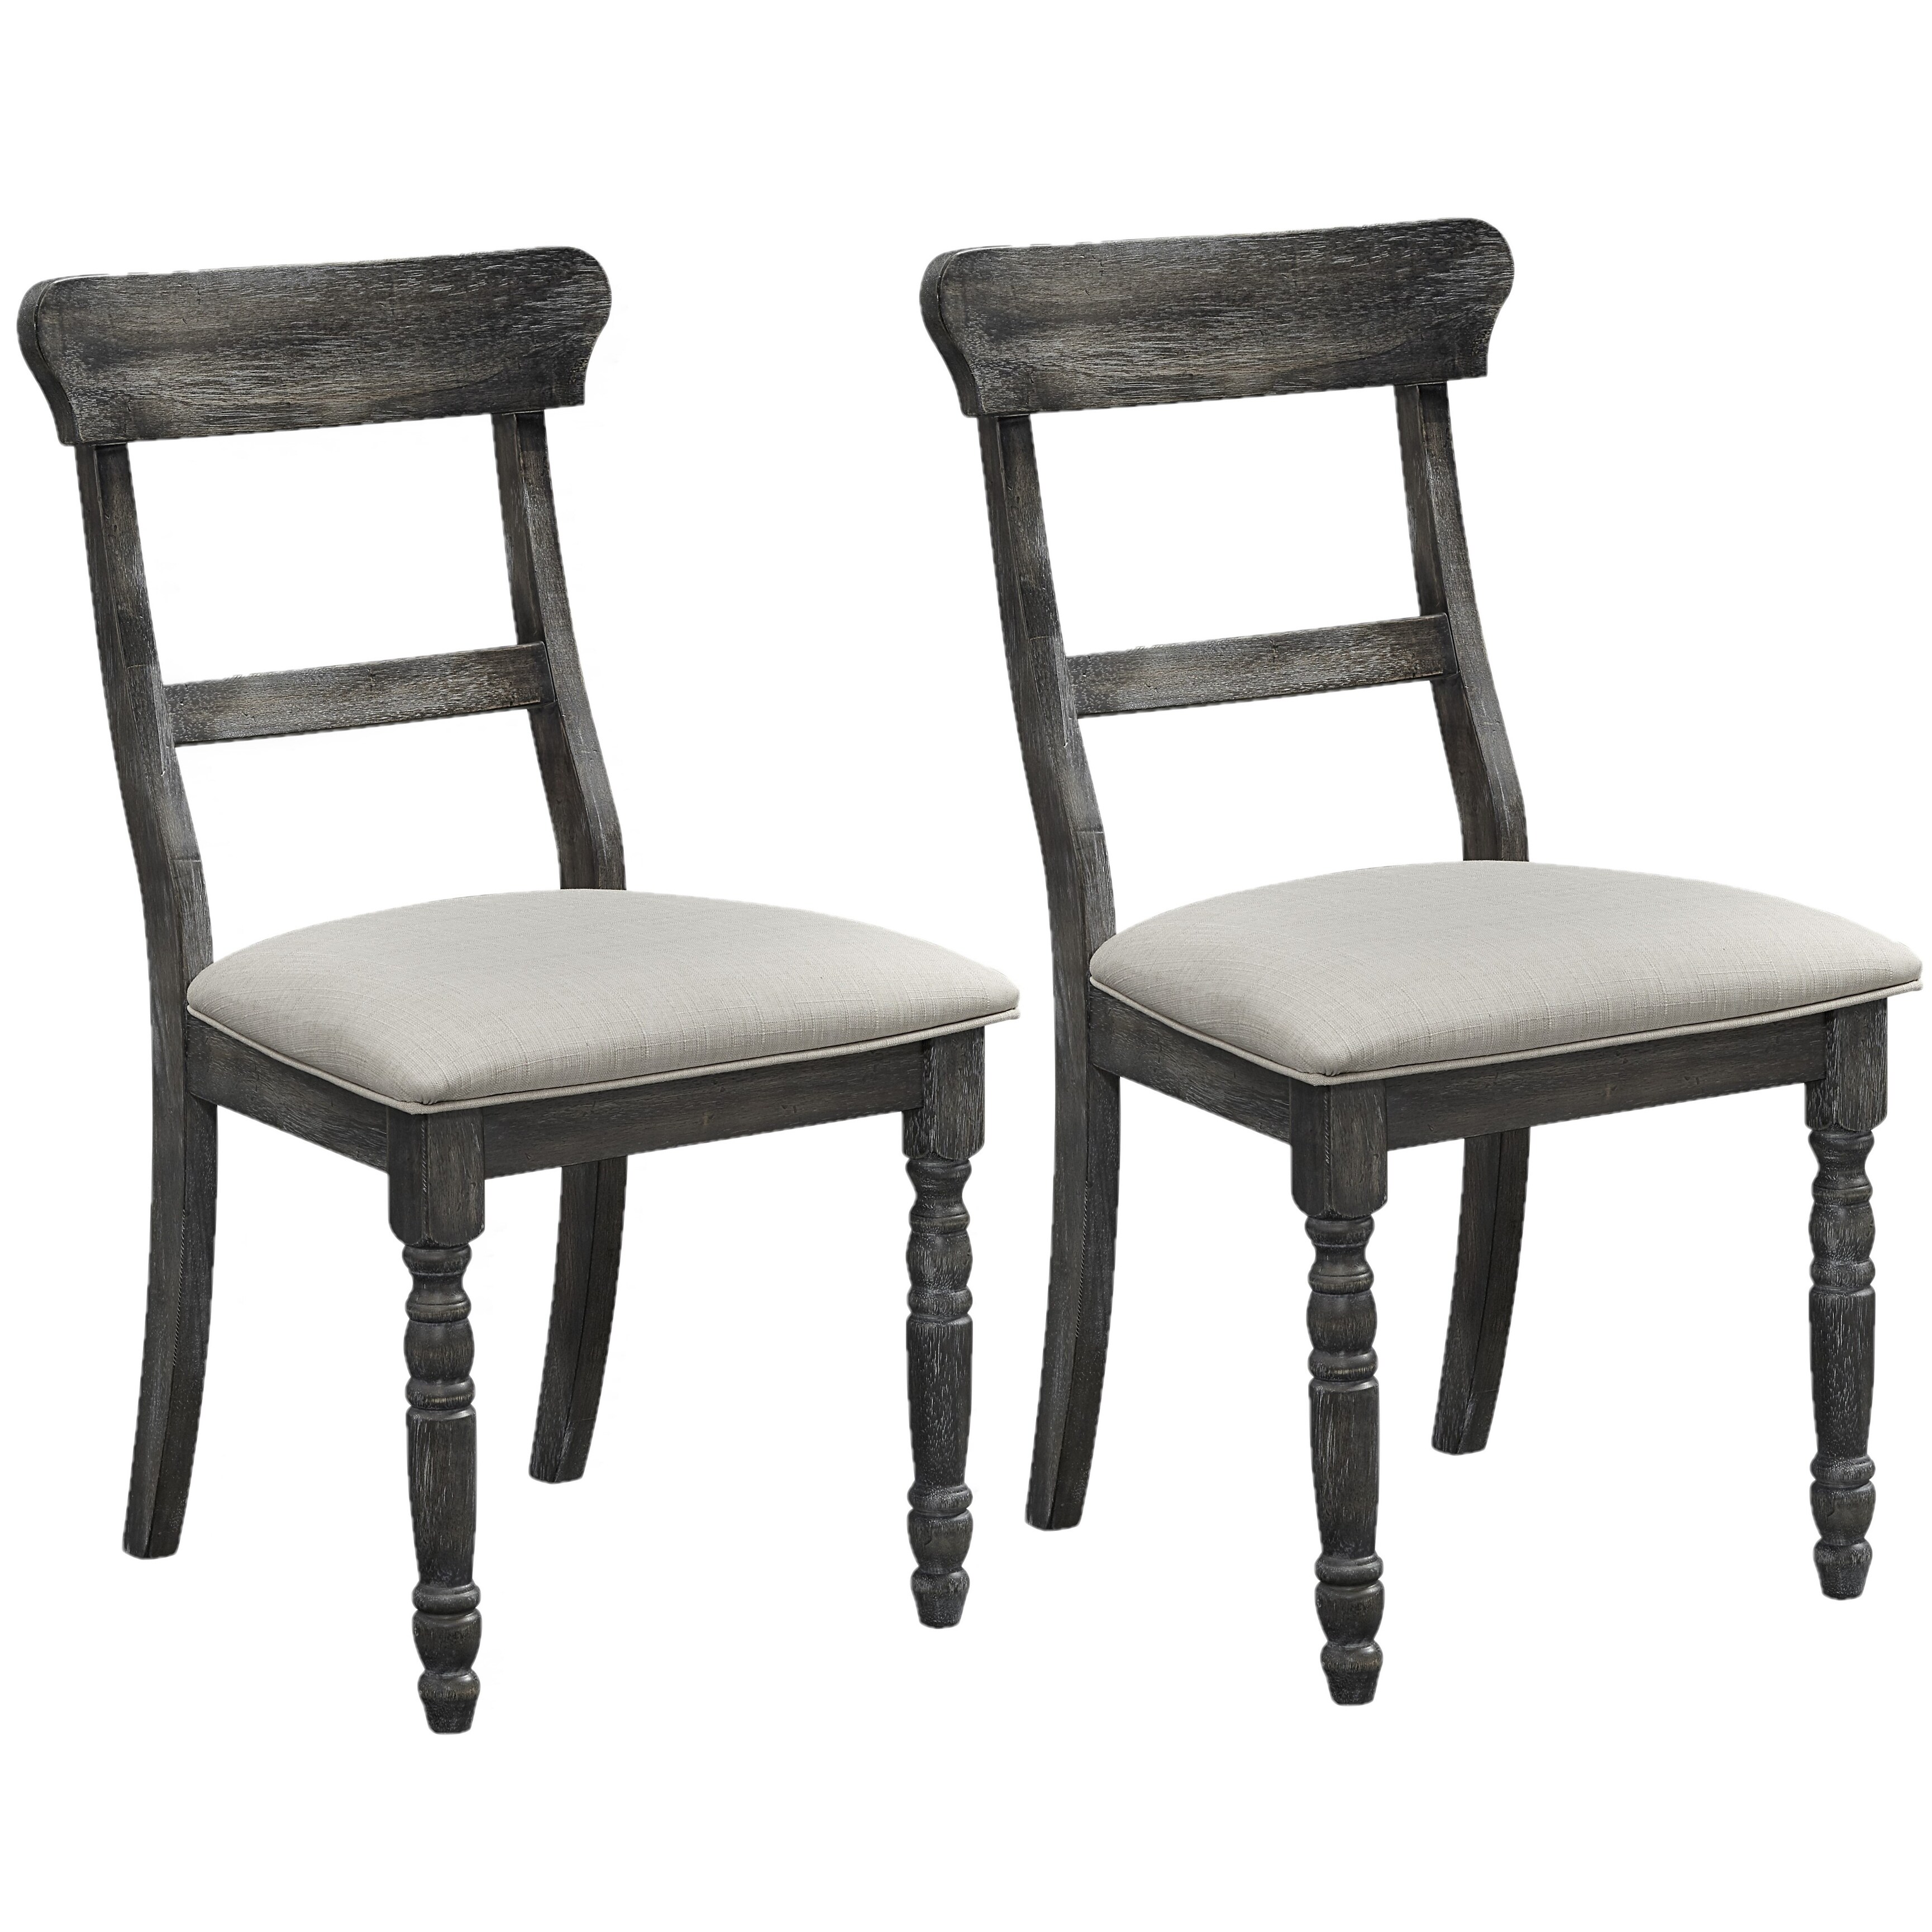 Muse Weathered Pepper Ladderback Dining Chair (Set of 2)